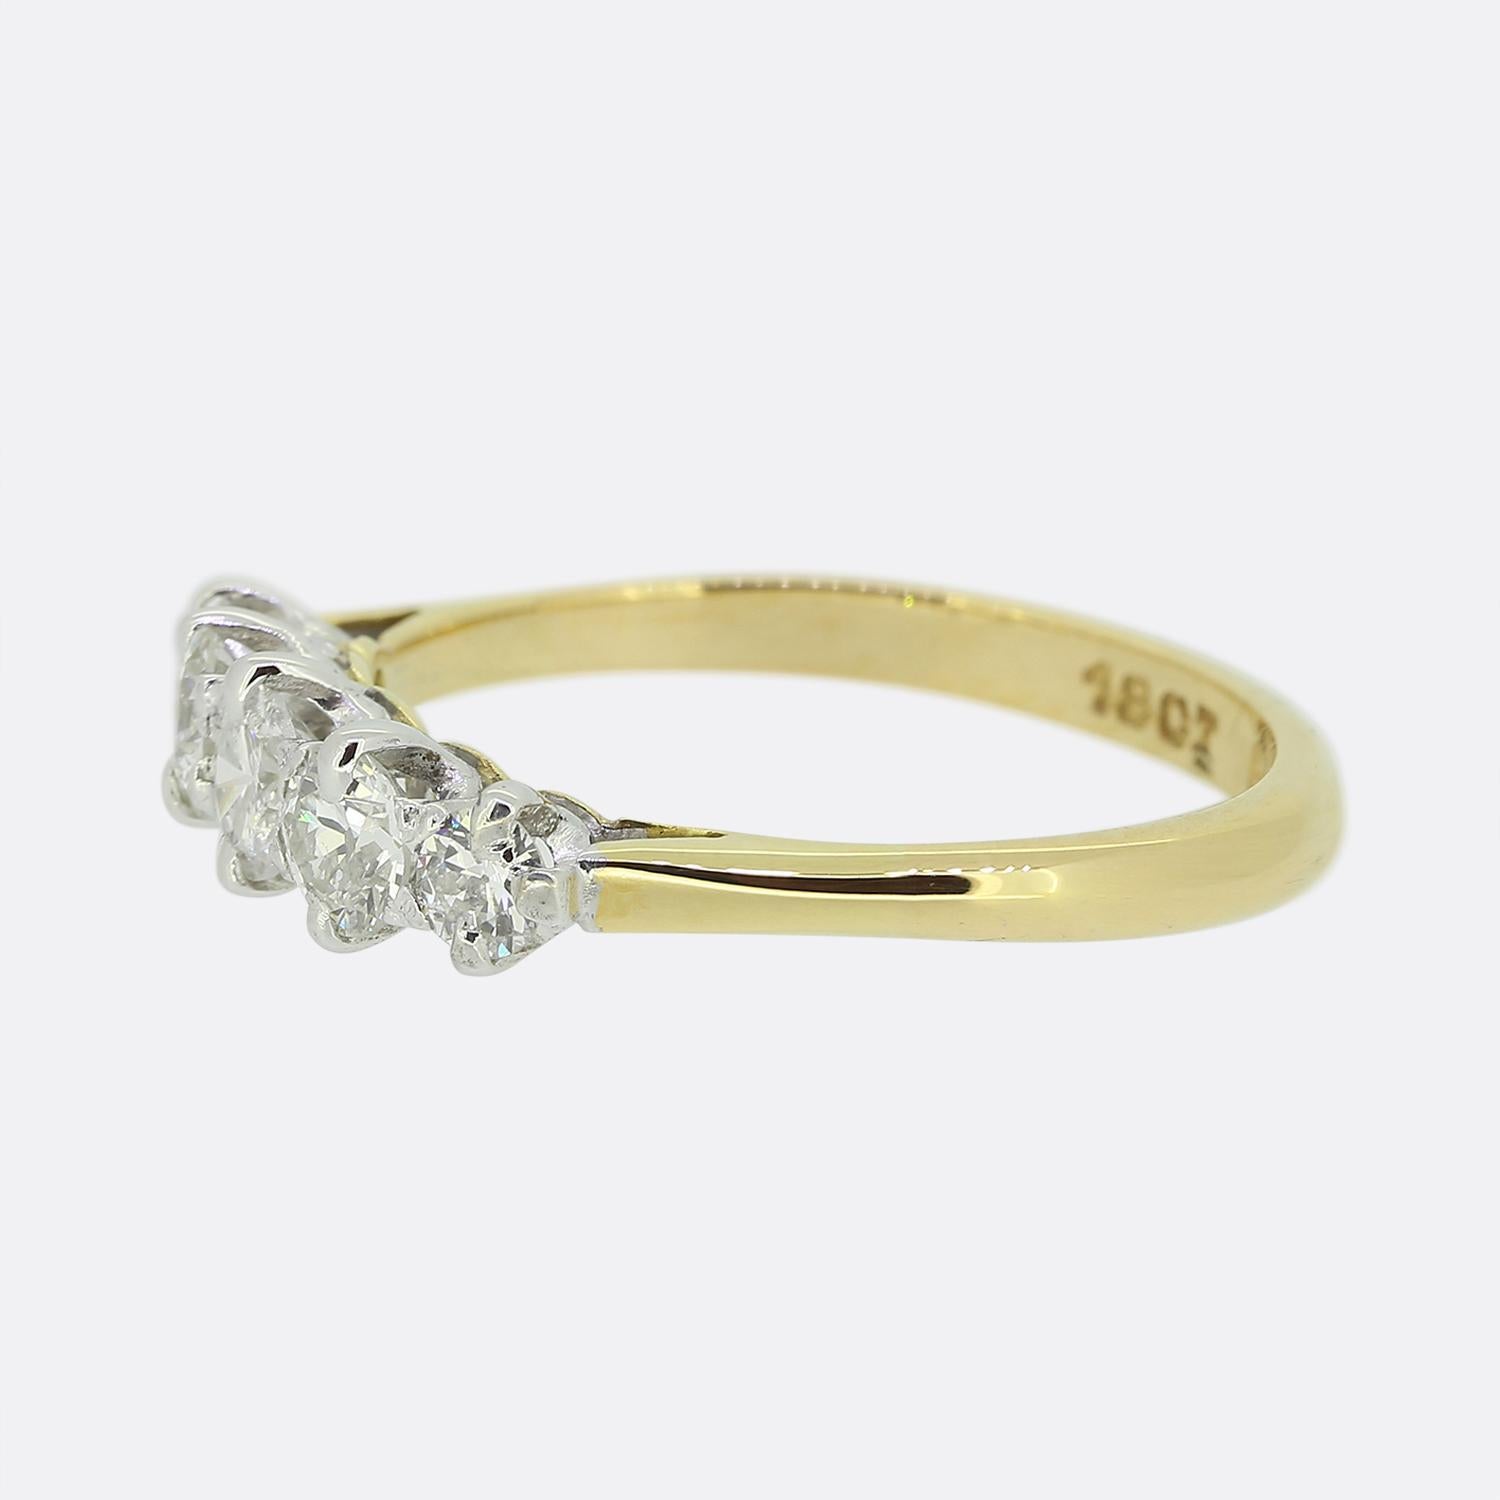 Here we have a classically styled five-stone diamond ring. A single round brilliant cut diamond sits at the centre of the face which is flanked on either side by a duo of round faceted old European cut diamonds. All bright white stones used here